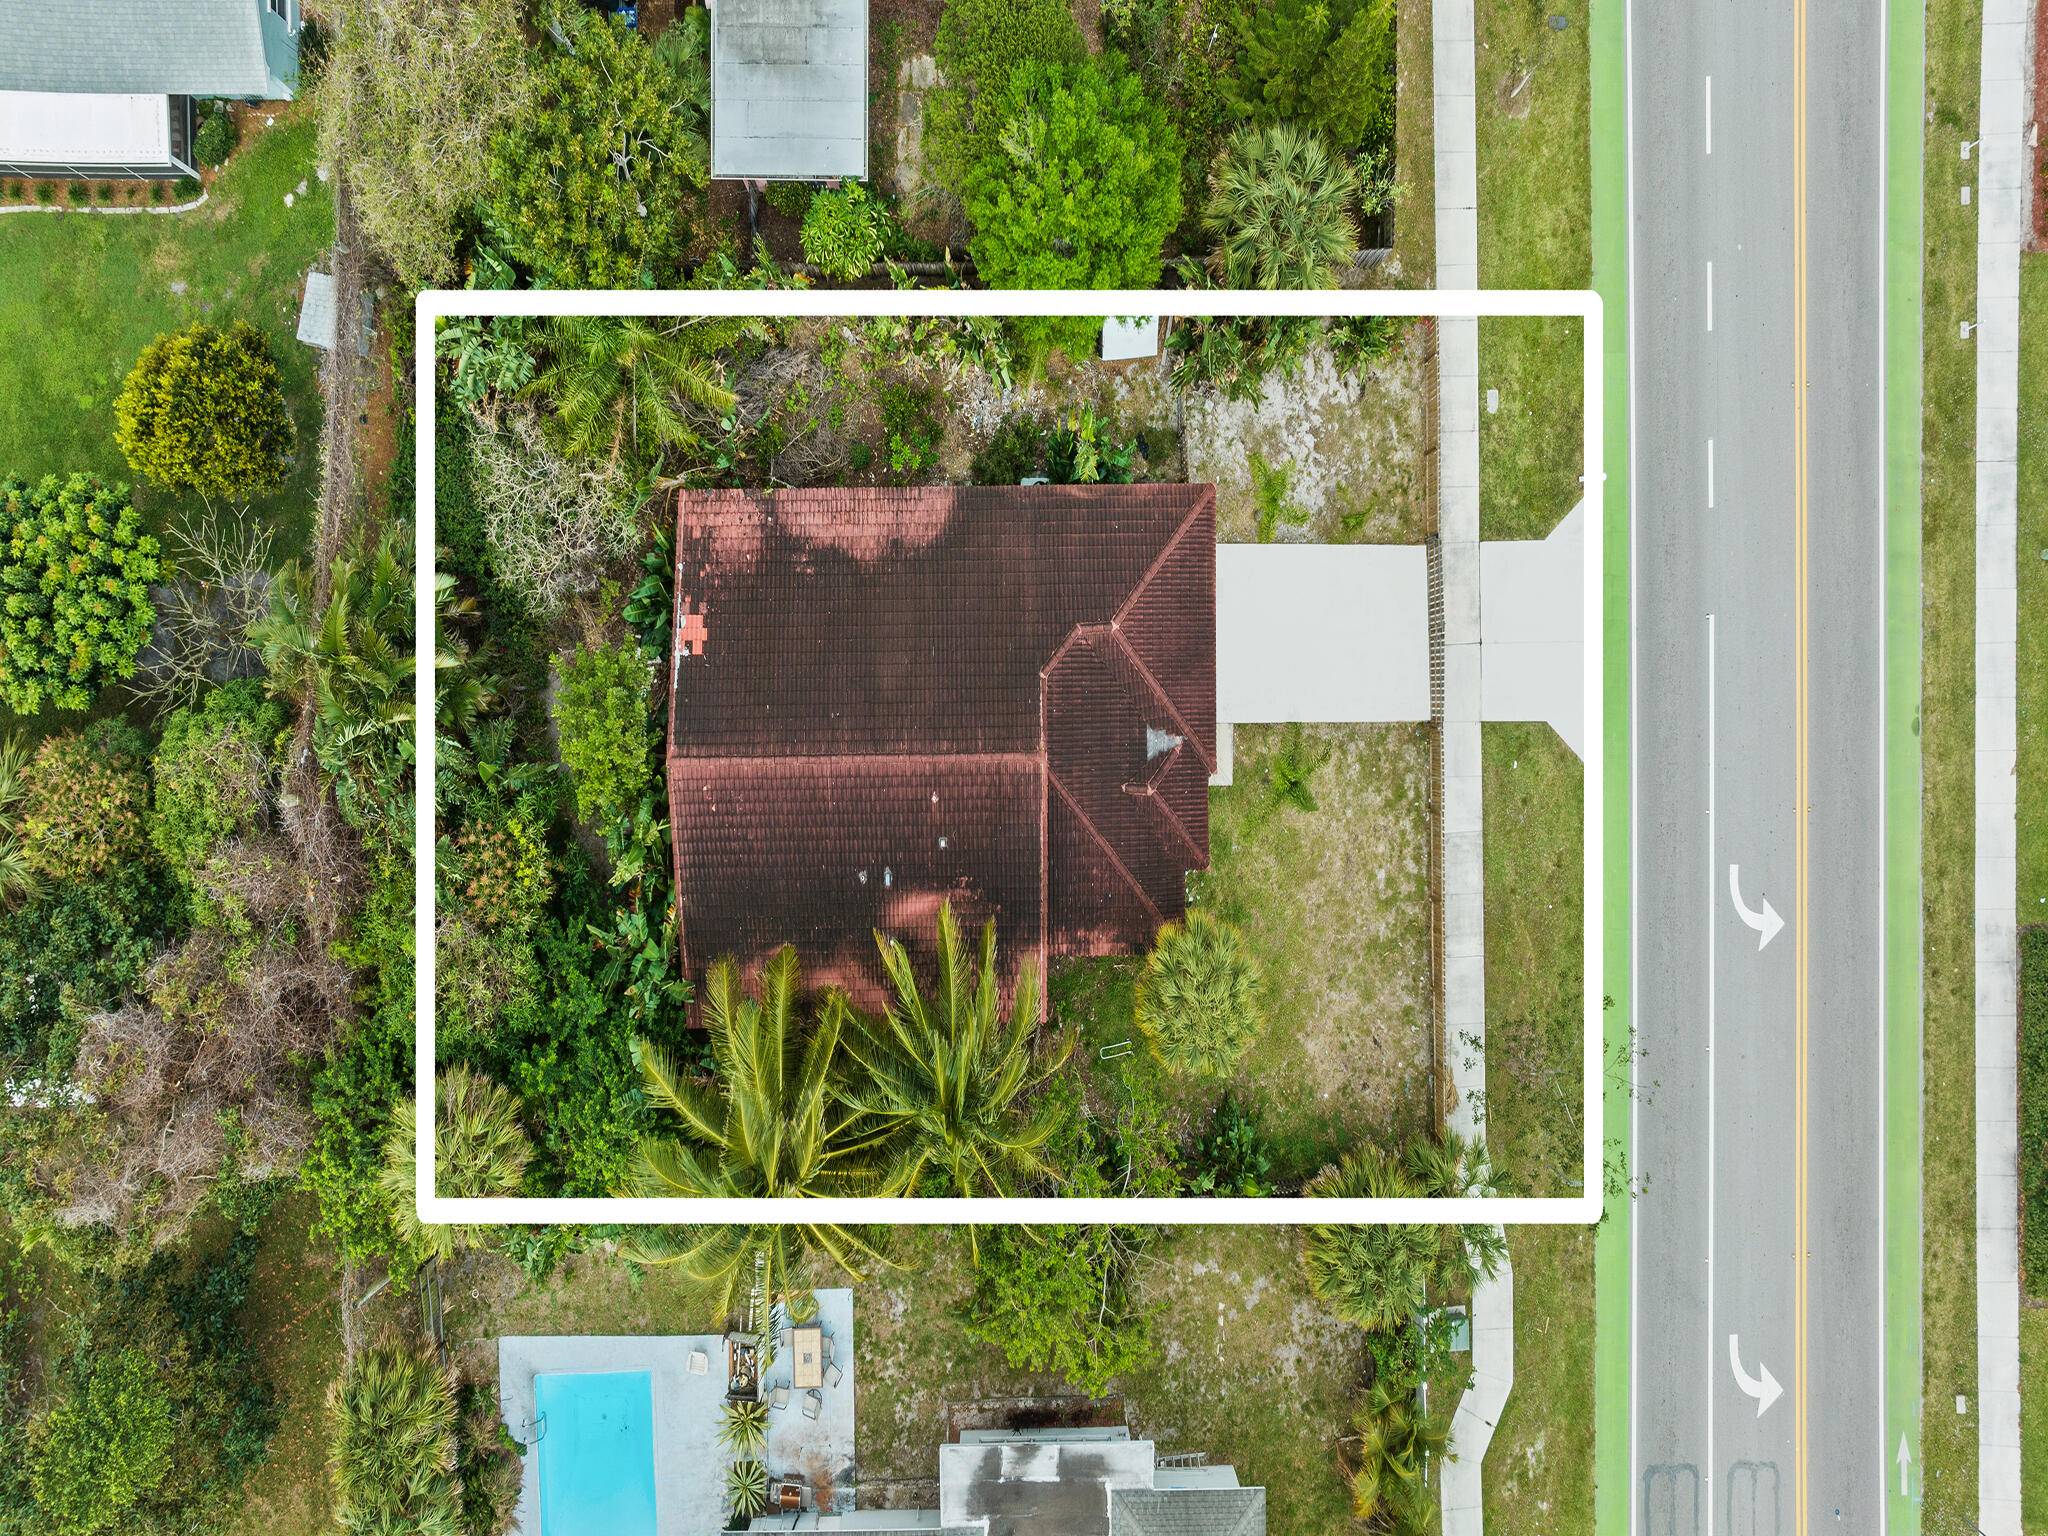 Prime lot in Delray Beach by several new constructions projects.